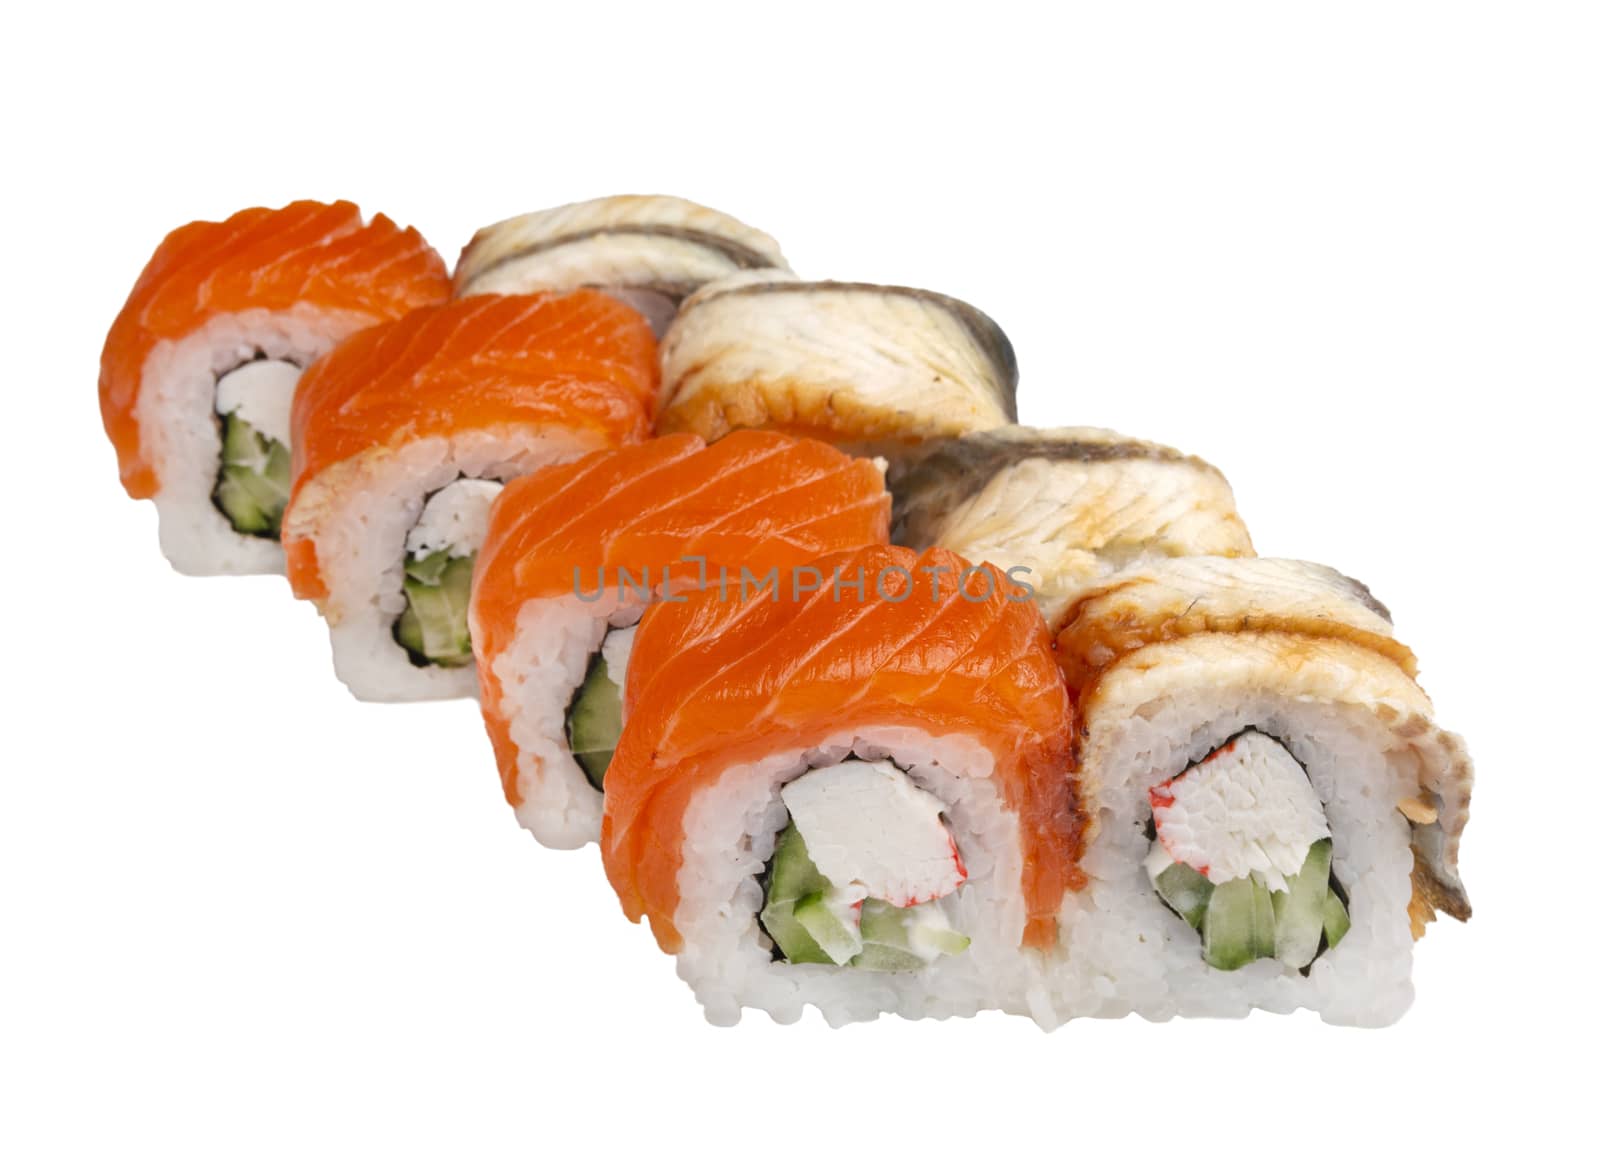 Sushi set on a white plate. Isolated on a white background.